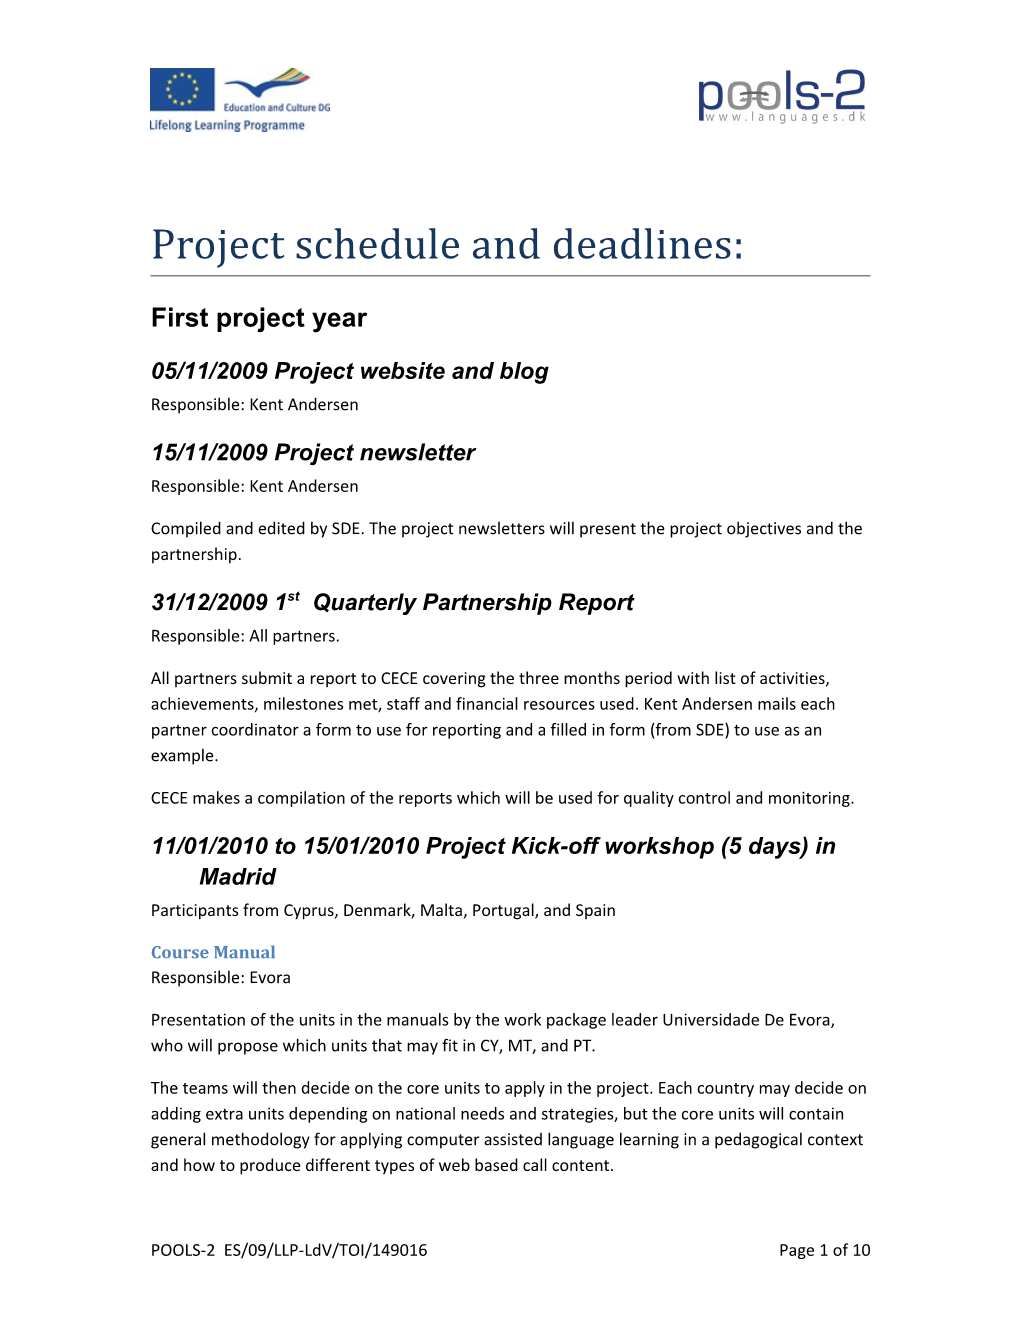 Project Schedule and Deadlines